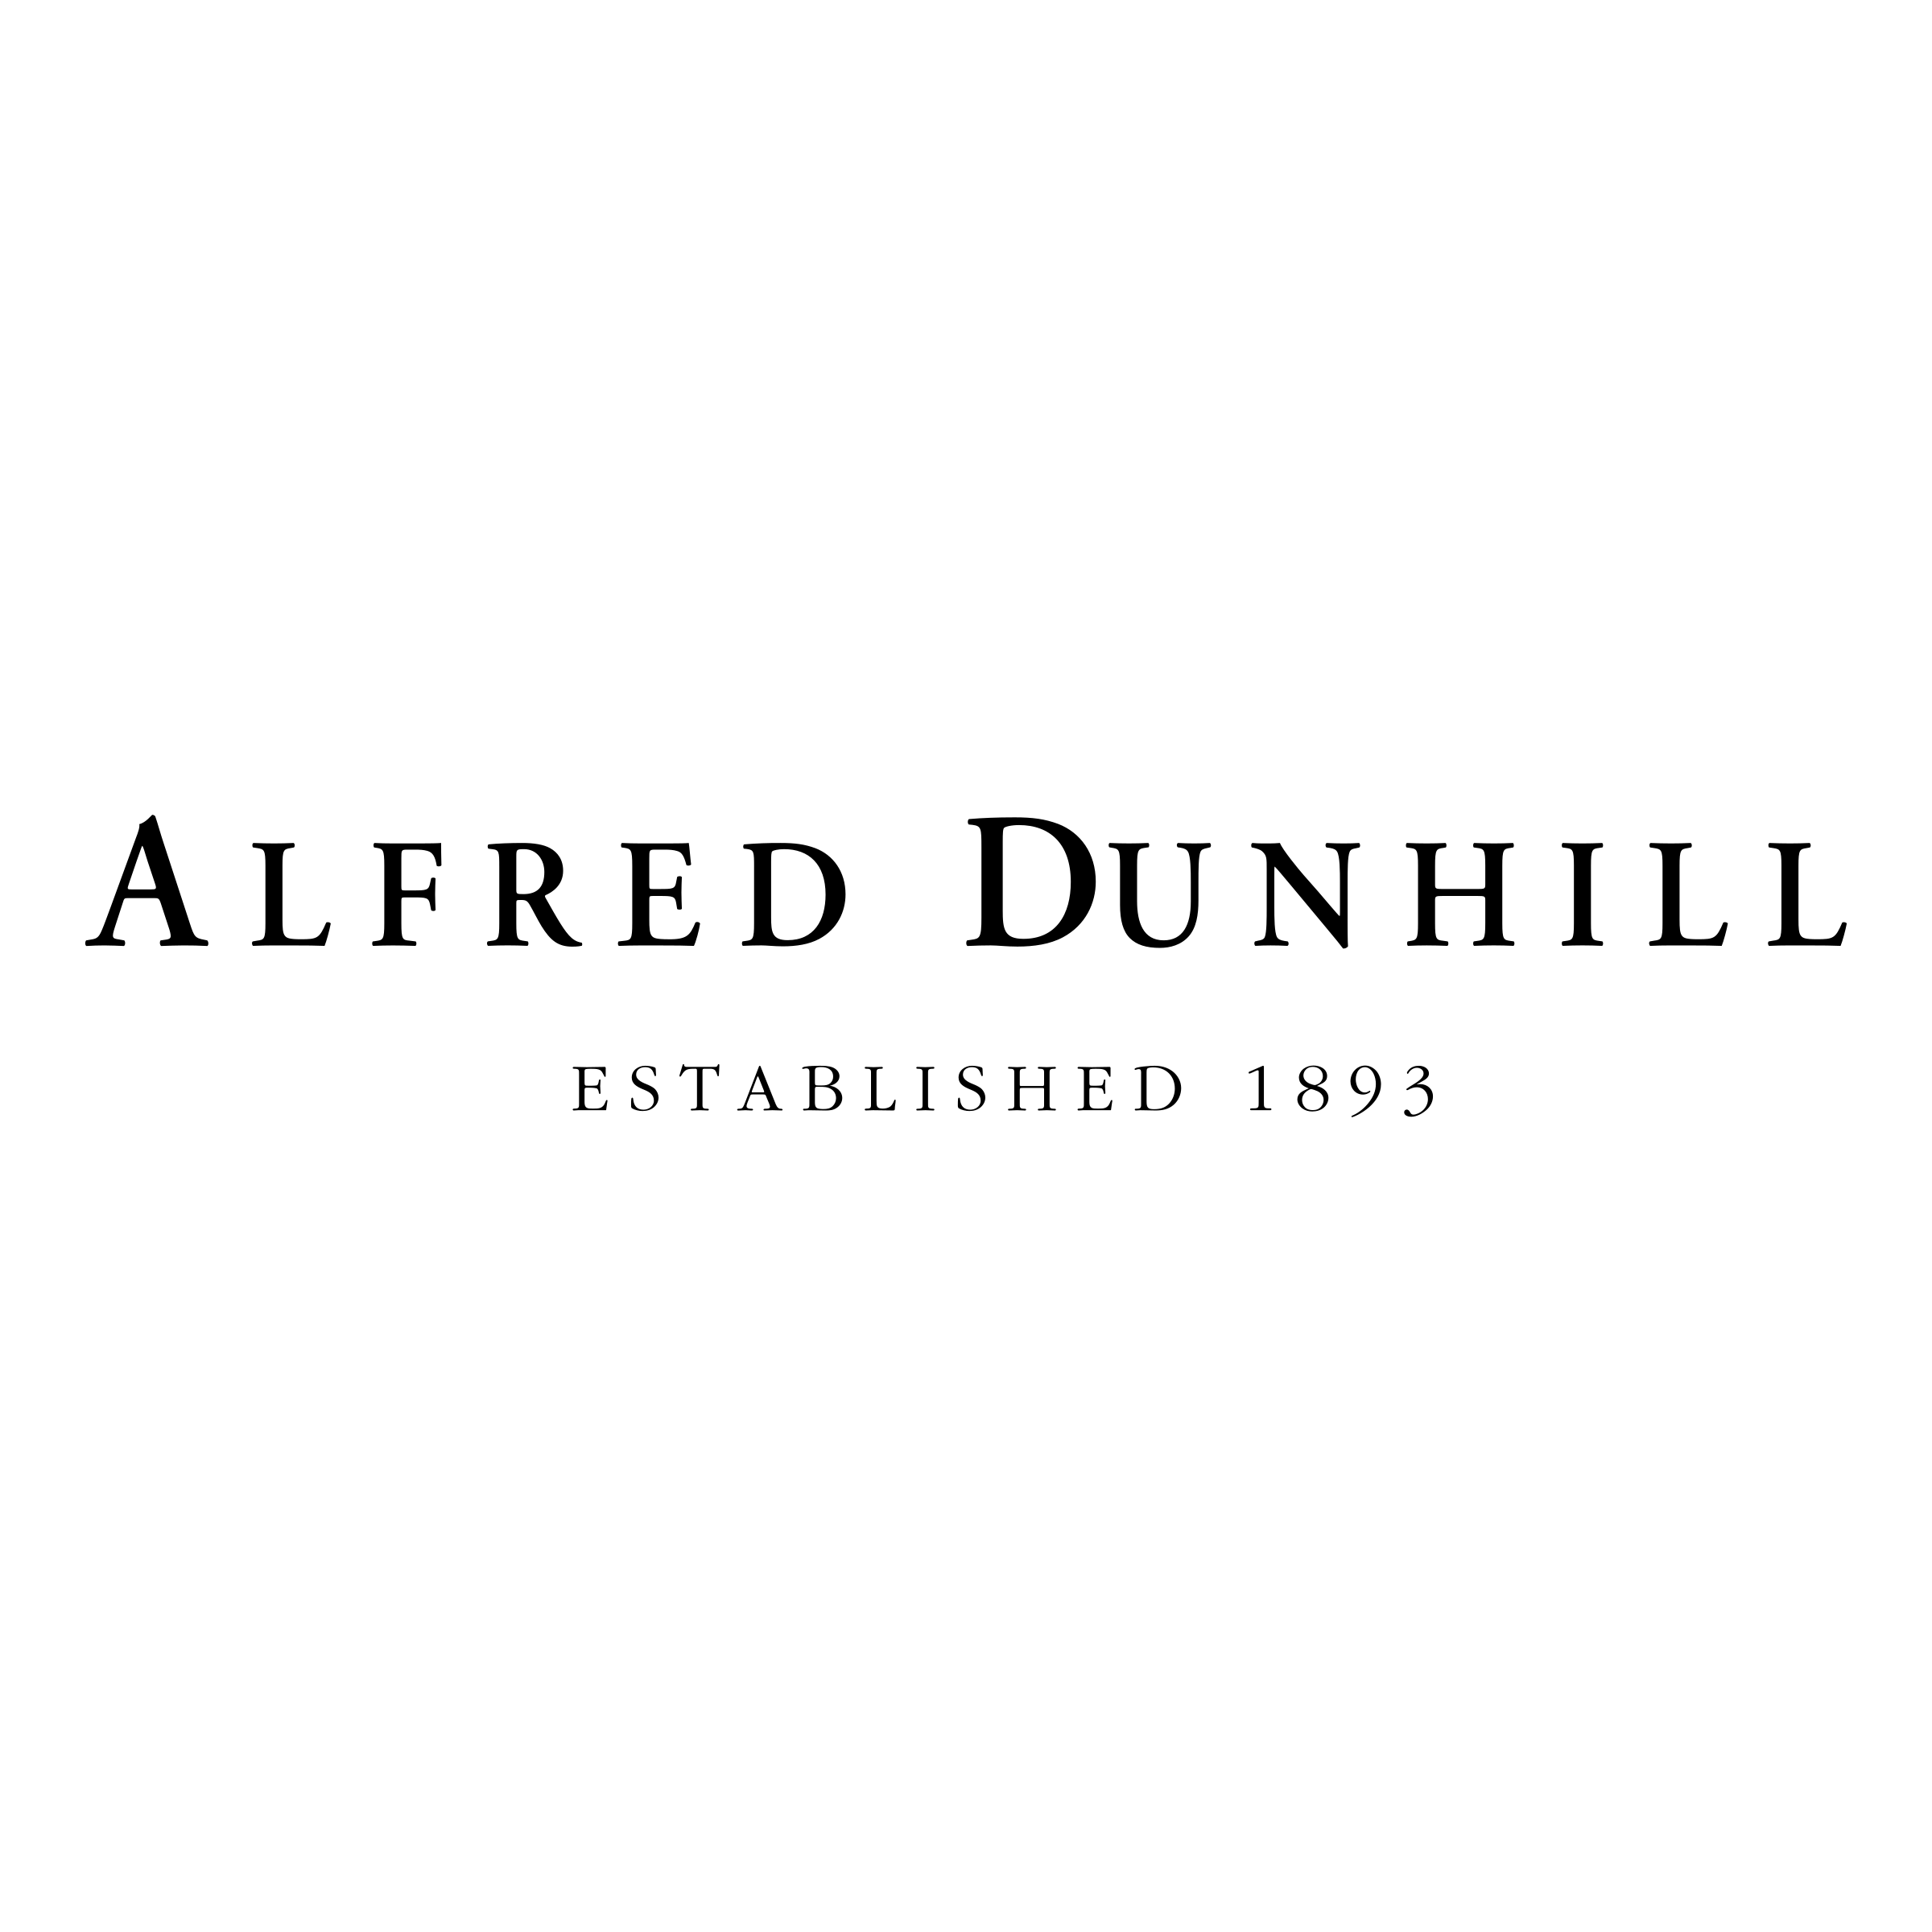 Dunhill Logo - Alfred Dunhill Logo PNG Transparent & SVG Vector - Freebie Supply